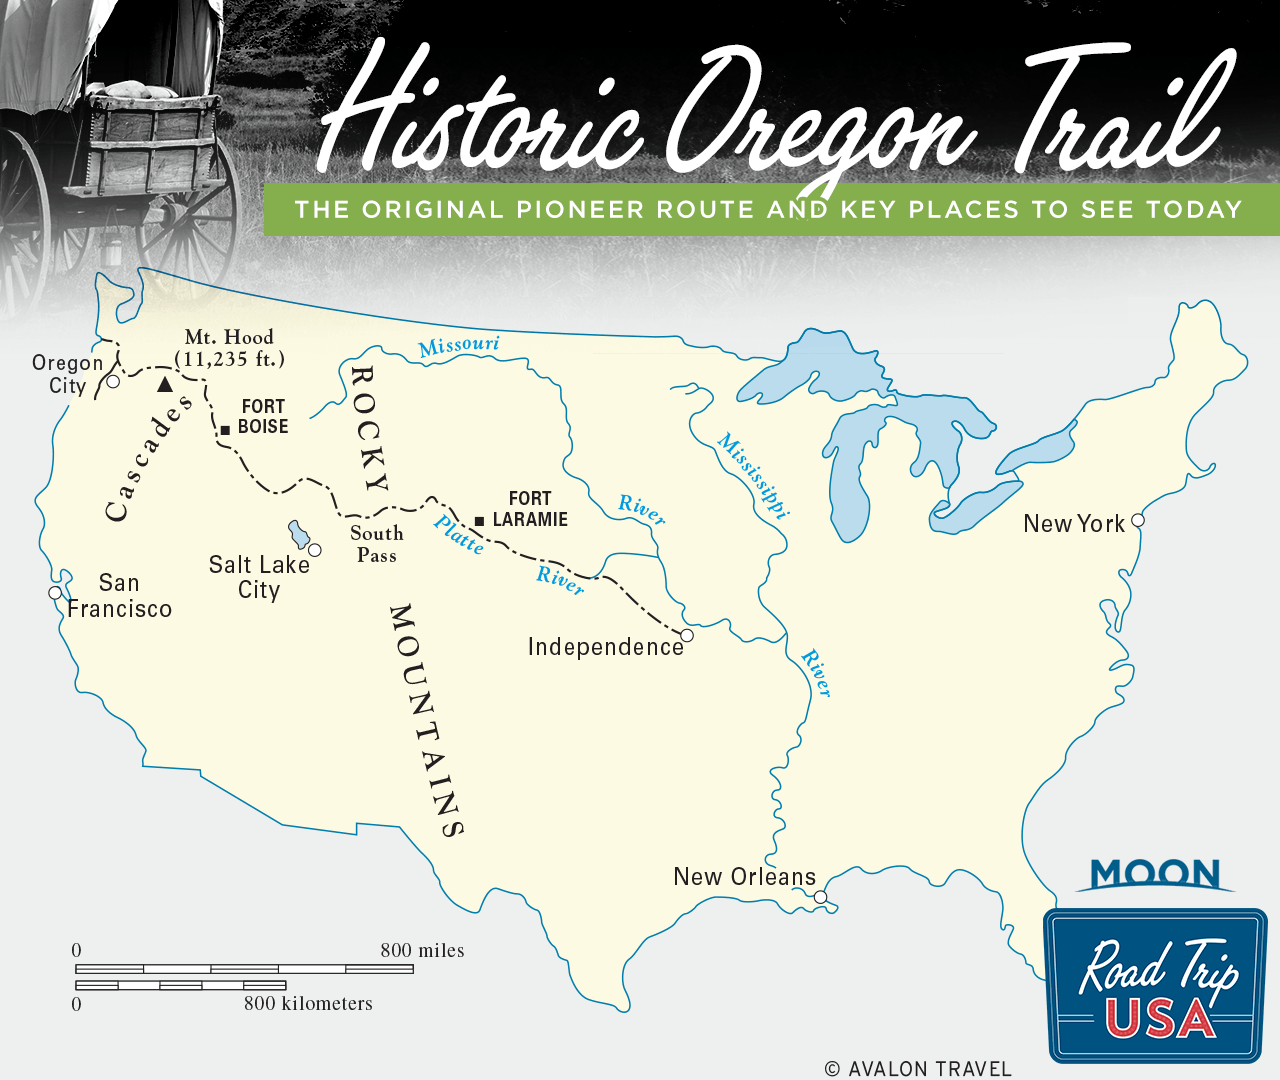 Map of the historic Oregon Trail pioneer route with key places to visit today